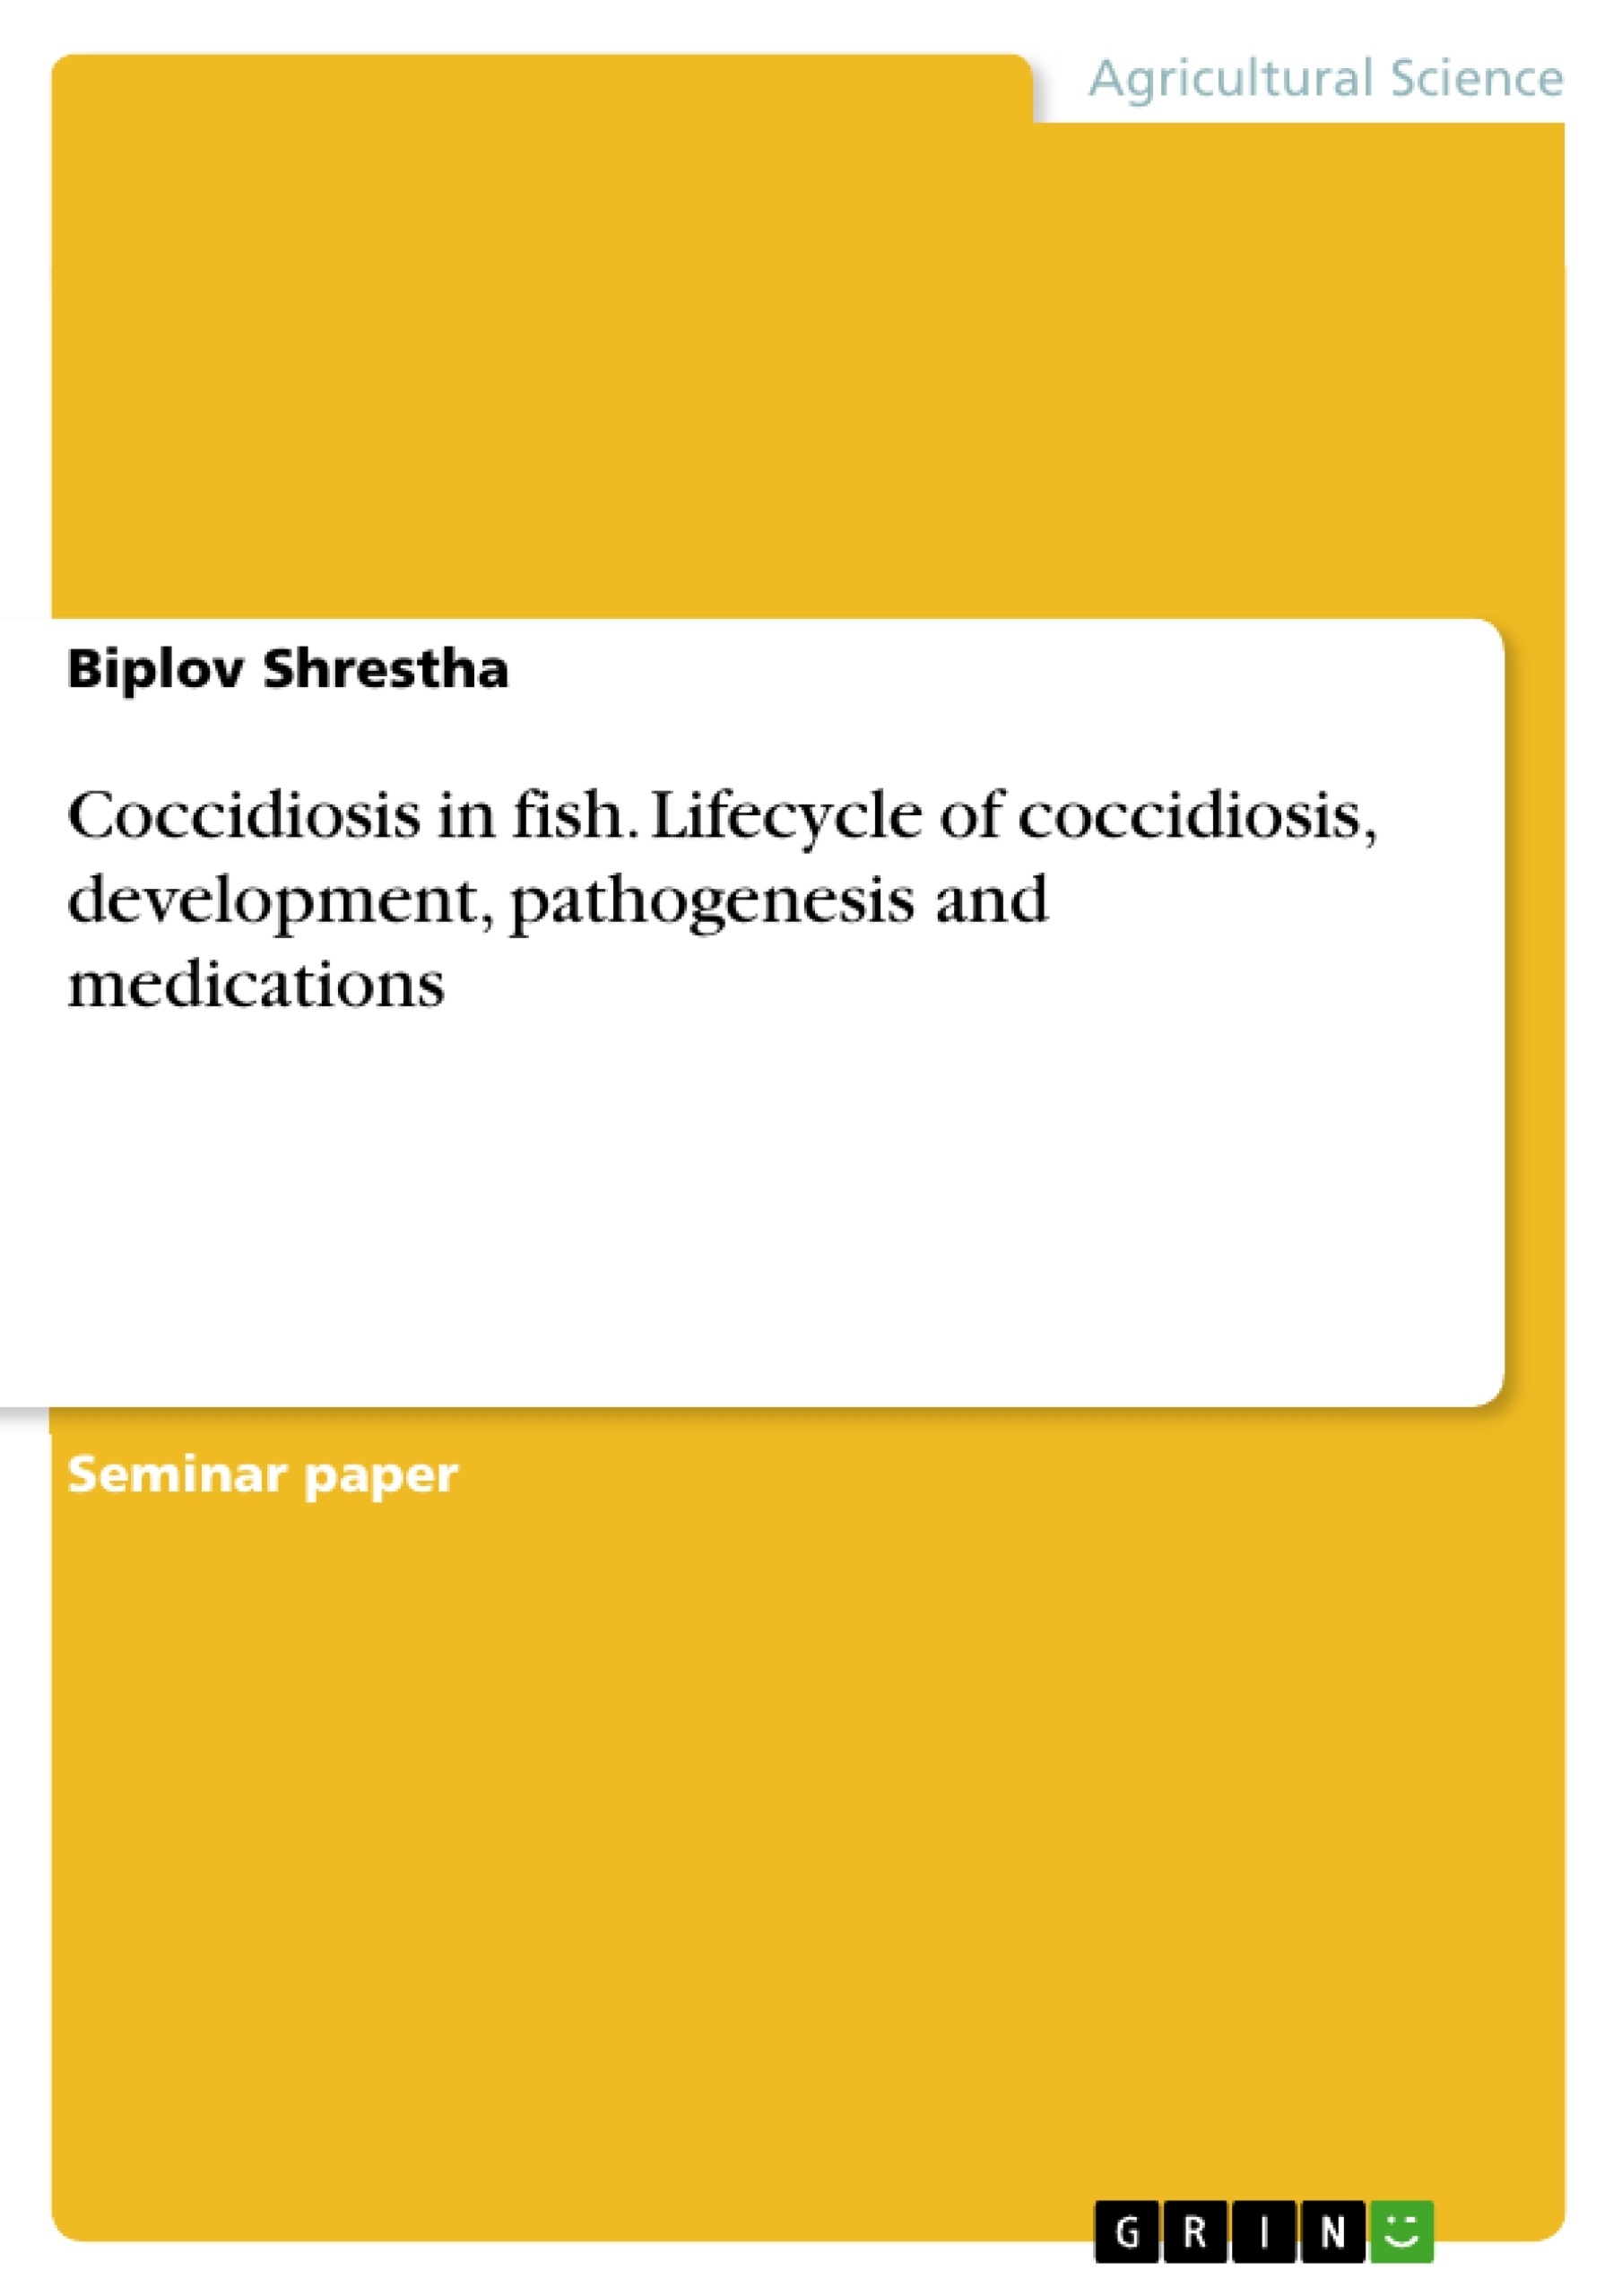 Title: Coccidiosis in fish. Lifecycle of coccidiosis, development, pathogenesis and medications